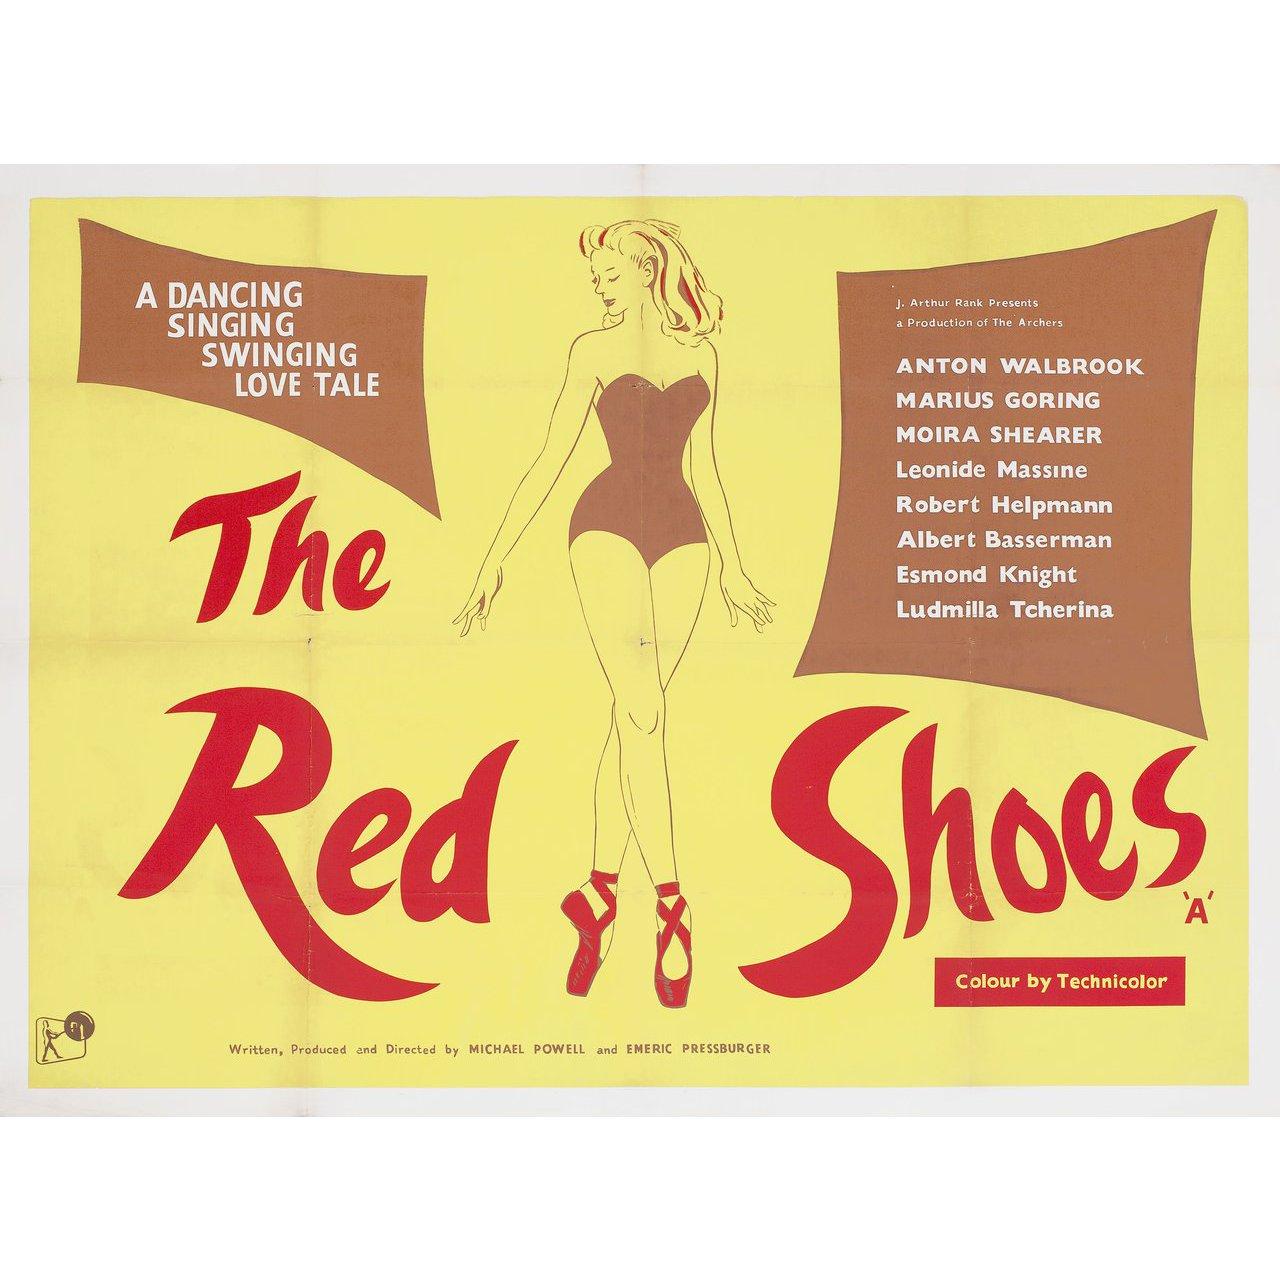 Original 1960s re-release British quad poster for the 1948 film The Red Shoes directed by Michael Powell / Emeric Pressburger with Marius Goring / Jean Short / Gordon Littmann / Julia Lang. Very Good condition, folded. Many original posters were